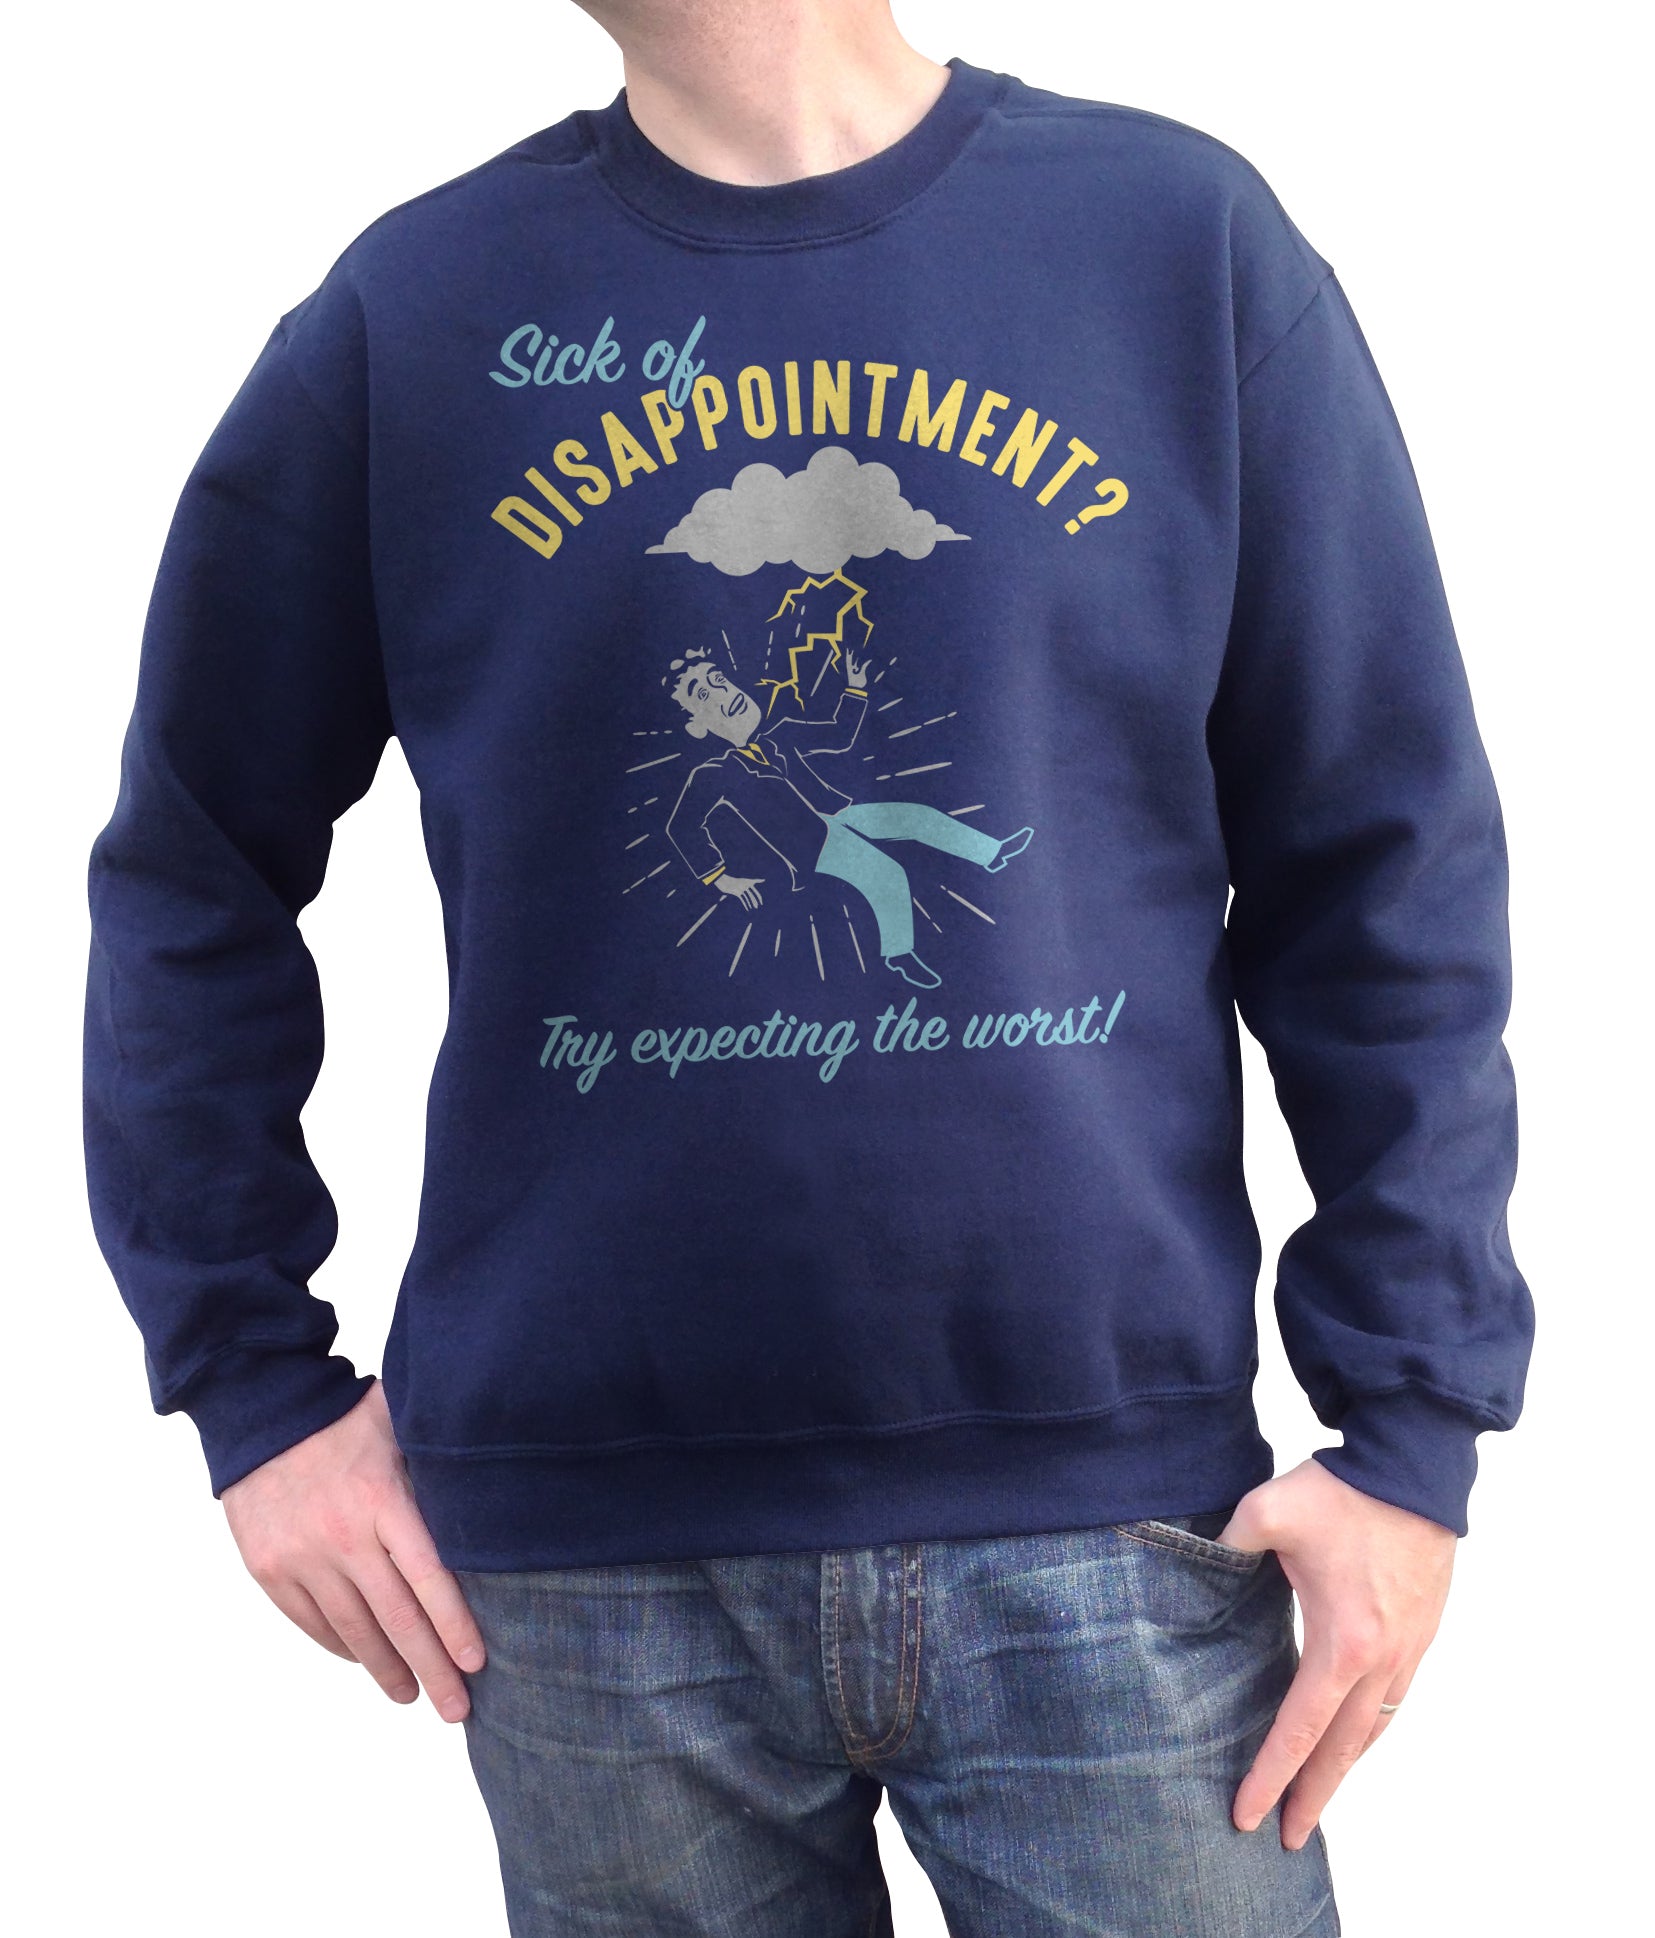 Unisex Sick of Disappointment? Try Expecting The Worst! Sweatshirt